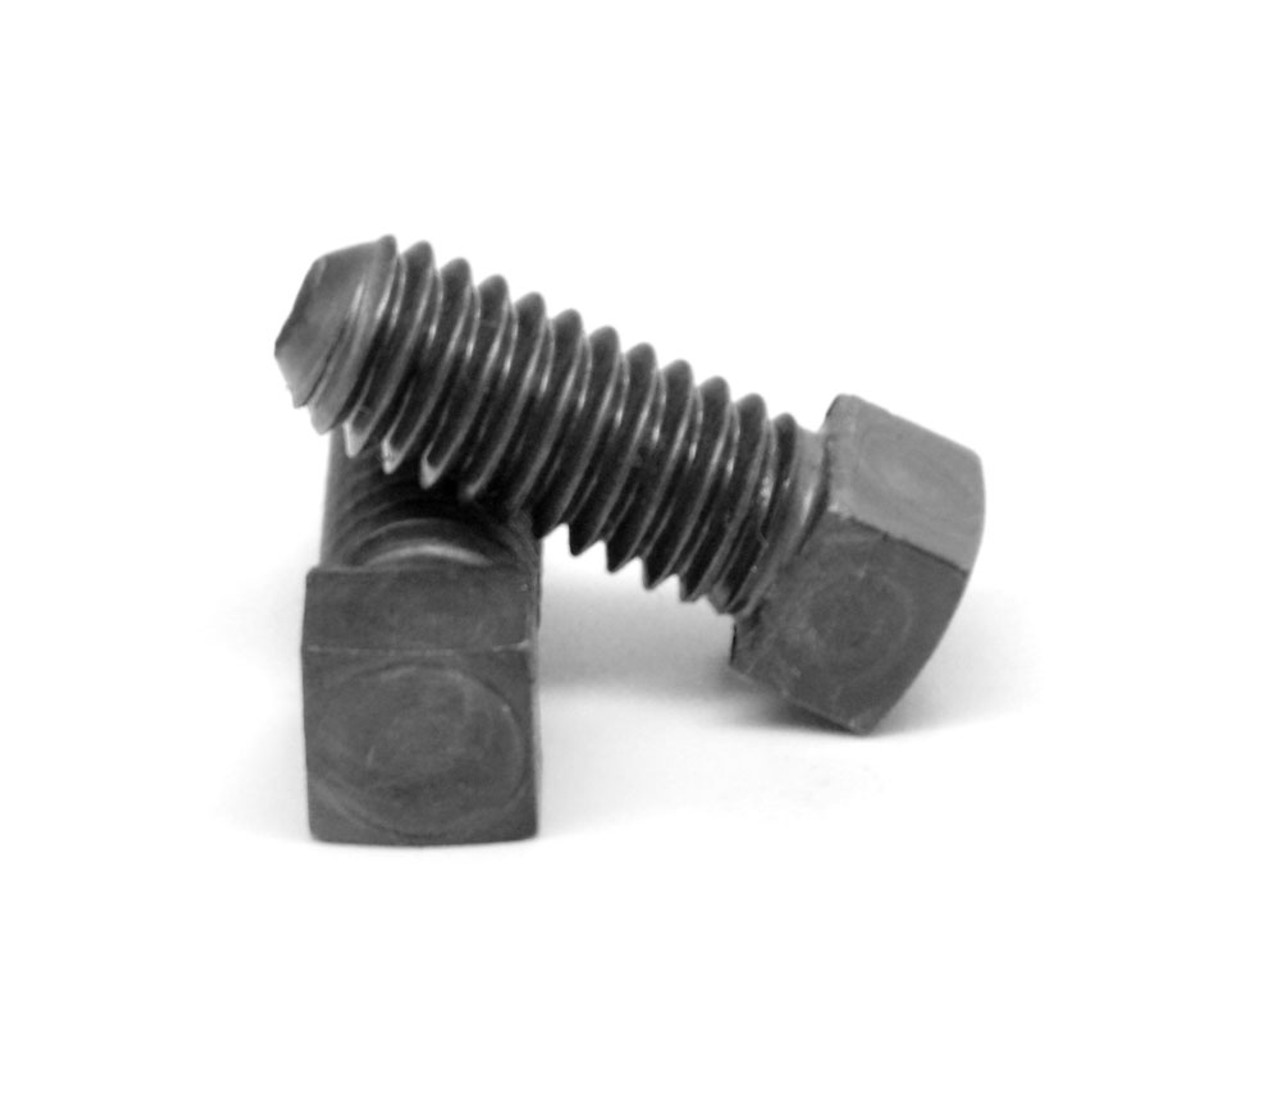 1/4"-20 x 1/2" (FT) Coarse Thread Square Head Set Screw Cup Point Through Hardened Alloy Steel Plain Finish